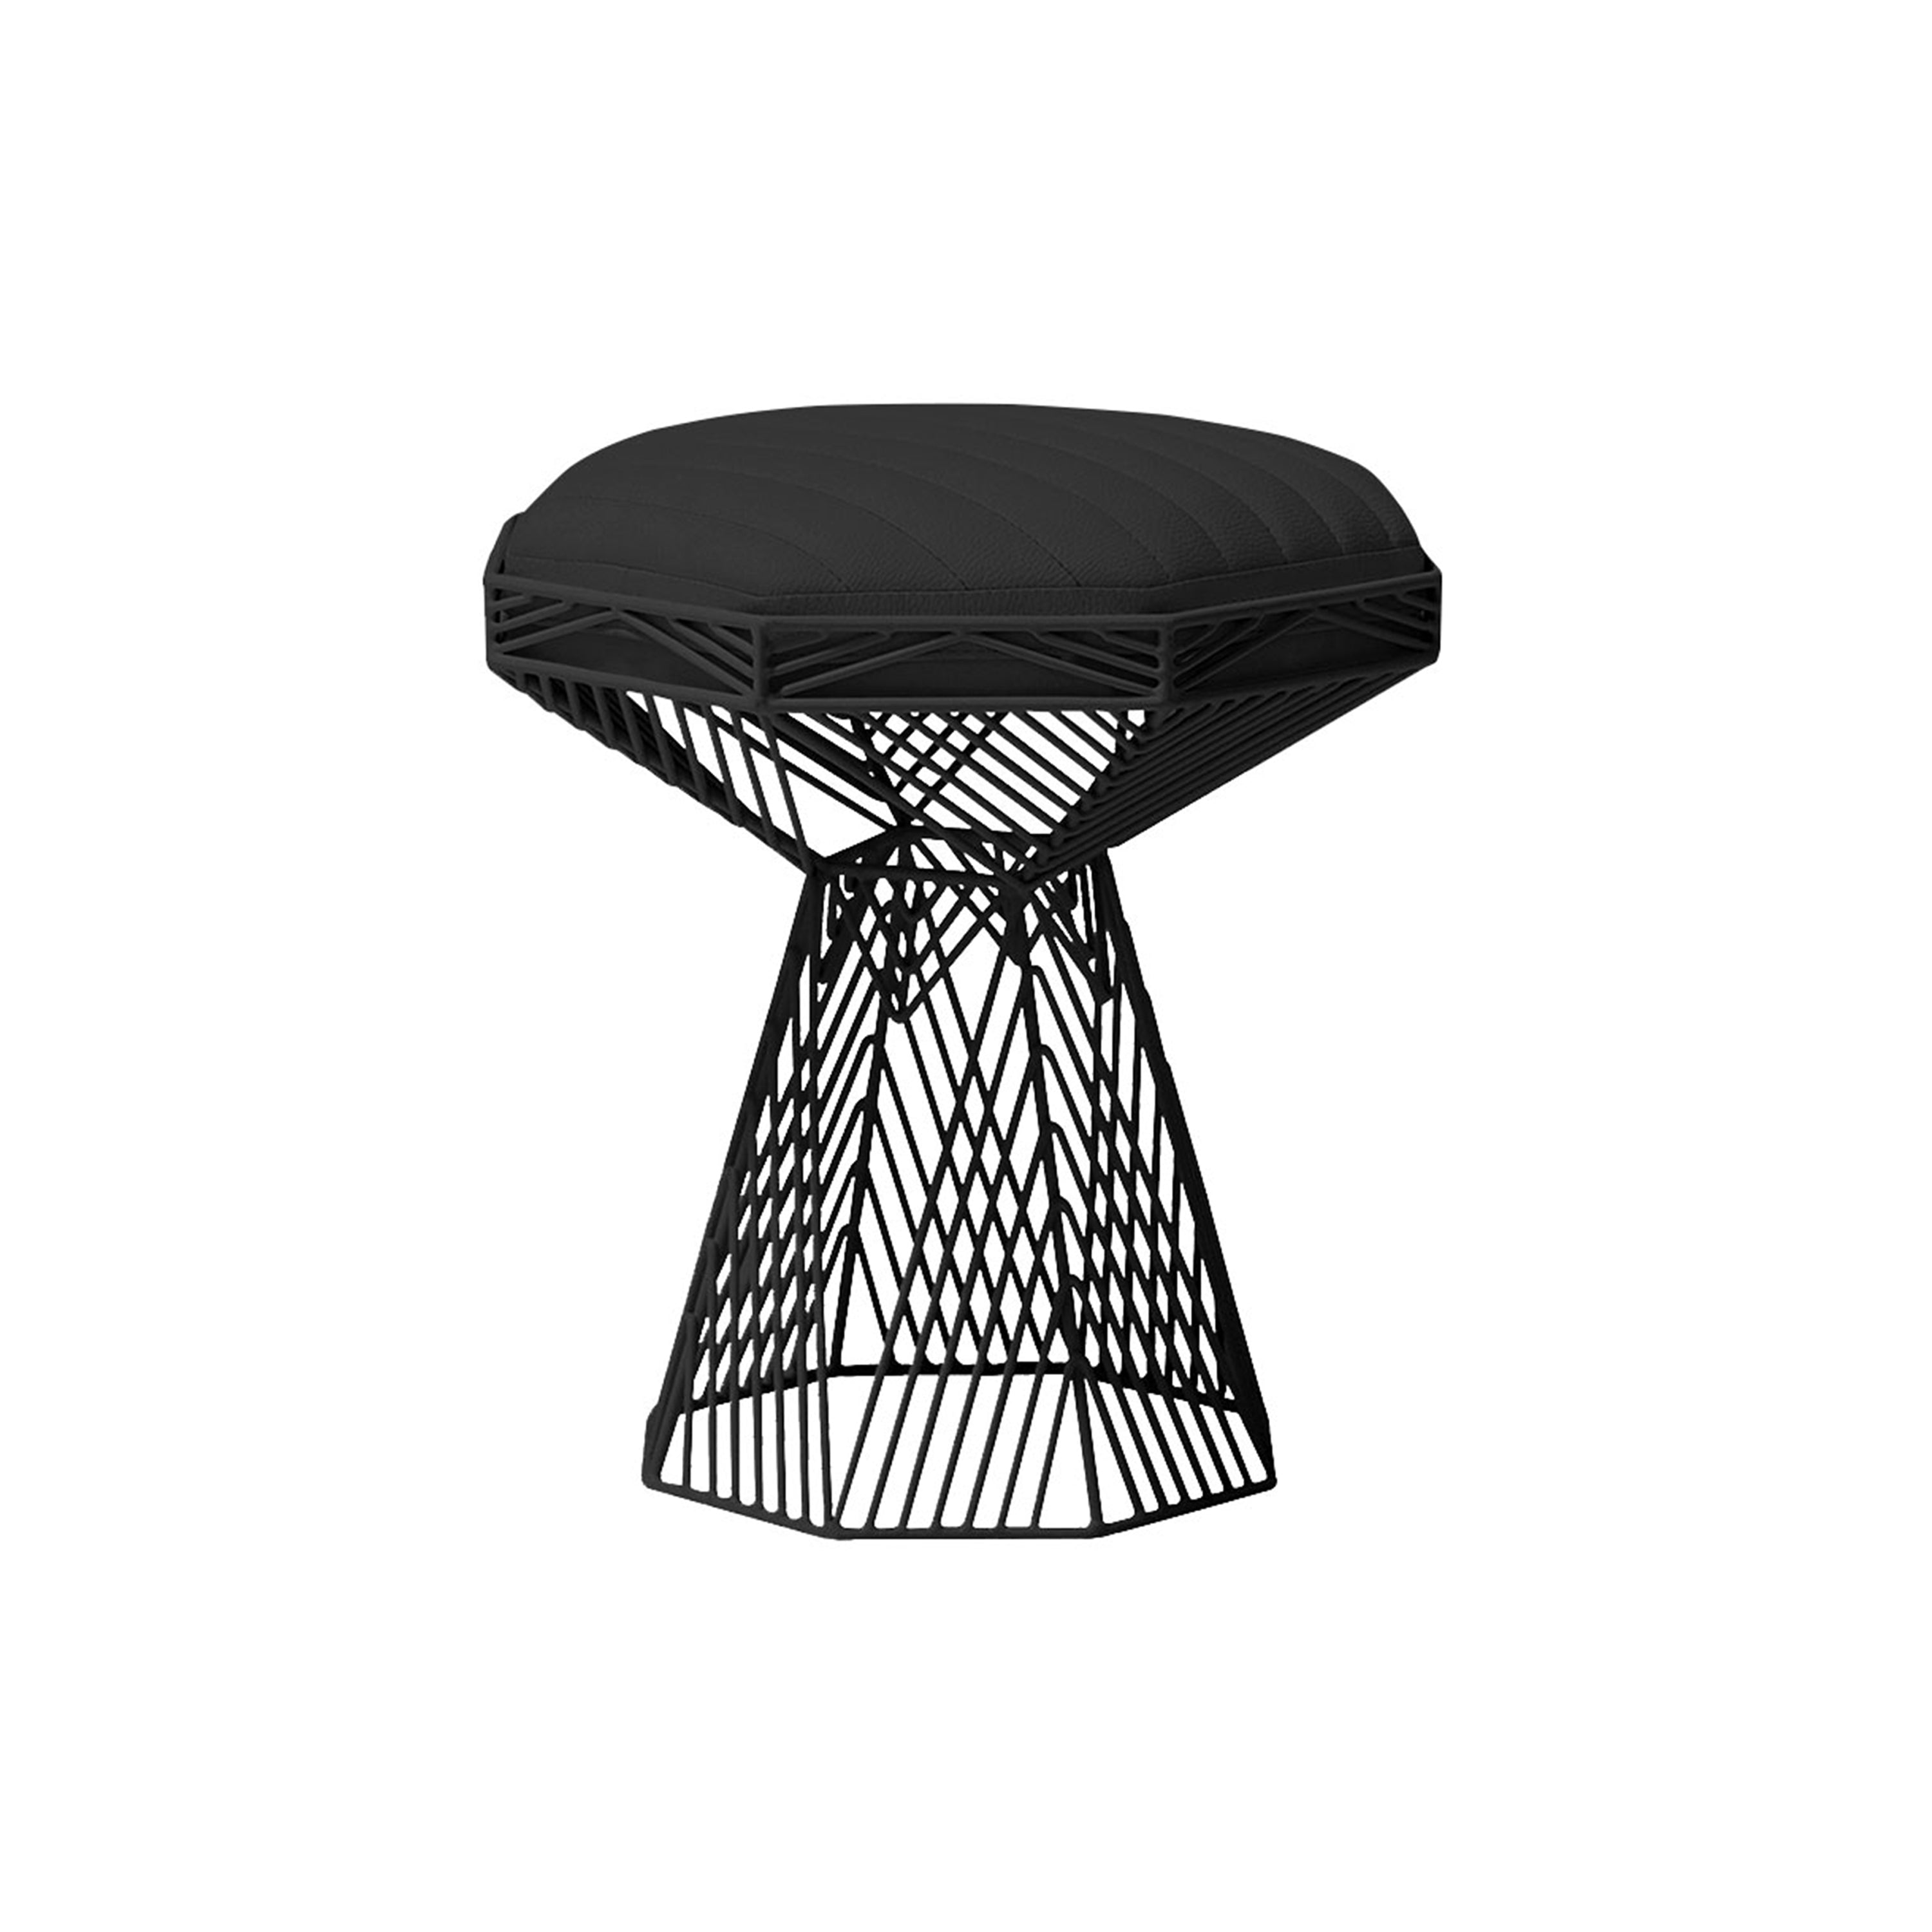 Switch Table/Stool: Color + Black + Black